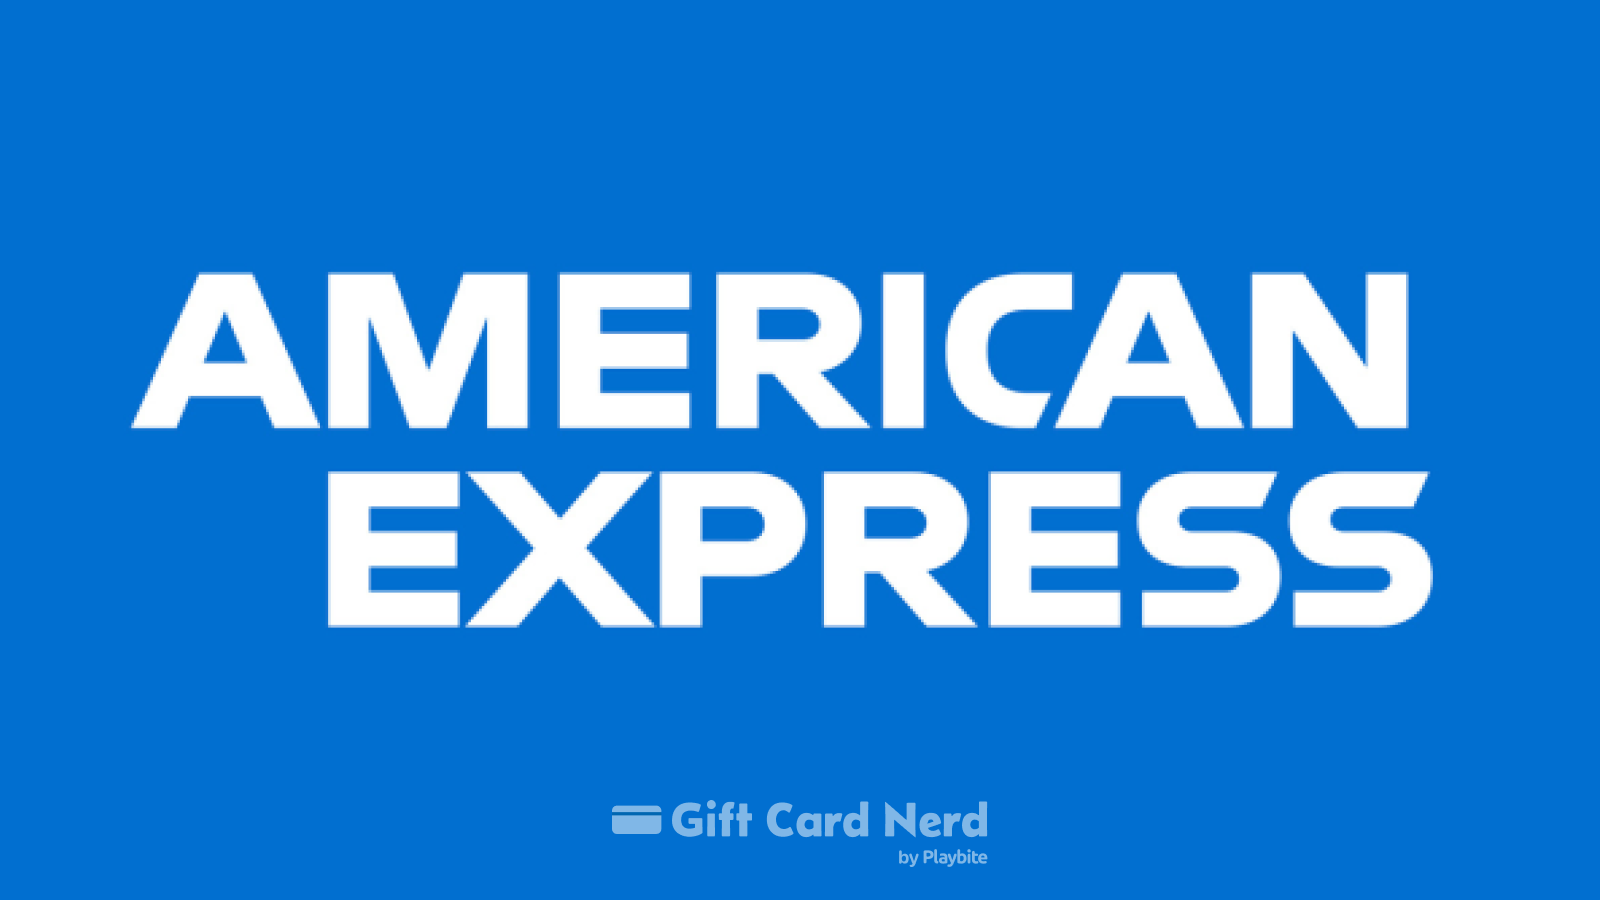 Does Walmart Sell Amex Gift Cards?